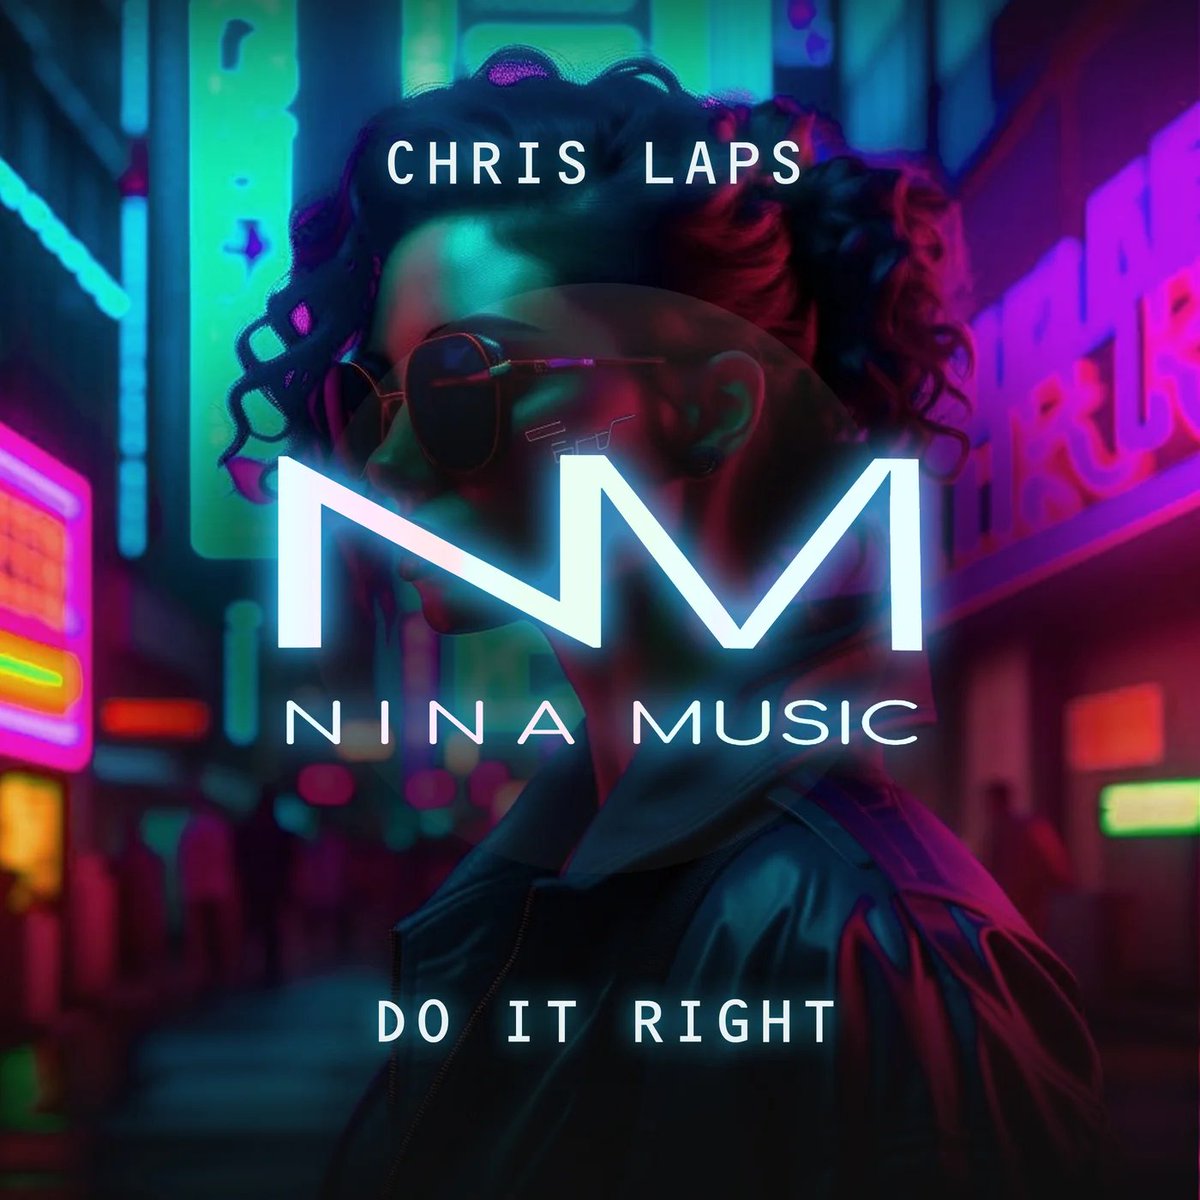 Chris Laps - Do It Right 
NINA Music pres. Chris Laps from Greece with fresh Funk single 'Do It Right'. Enjoy!
beatport.com/release/do-it-…
#funk #funkmusic #nudisco